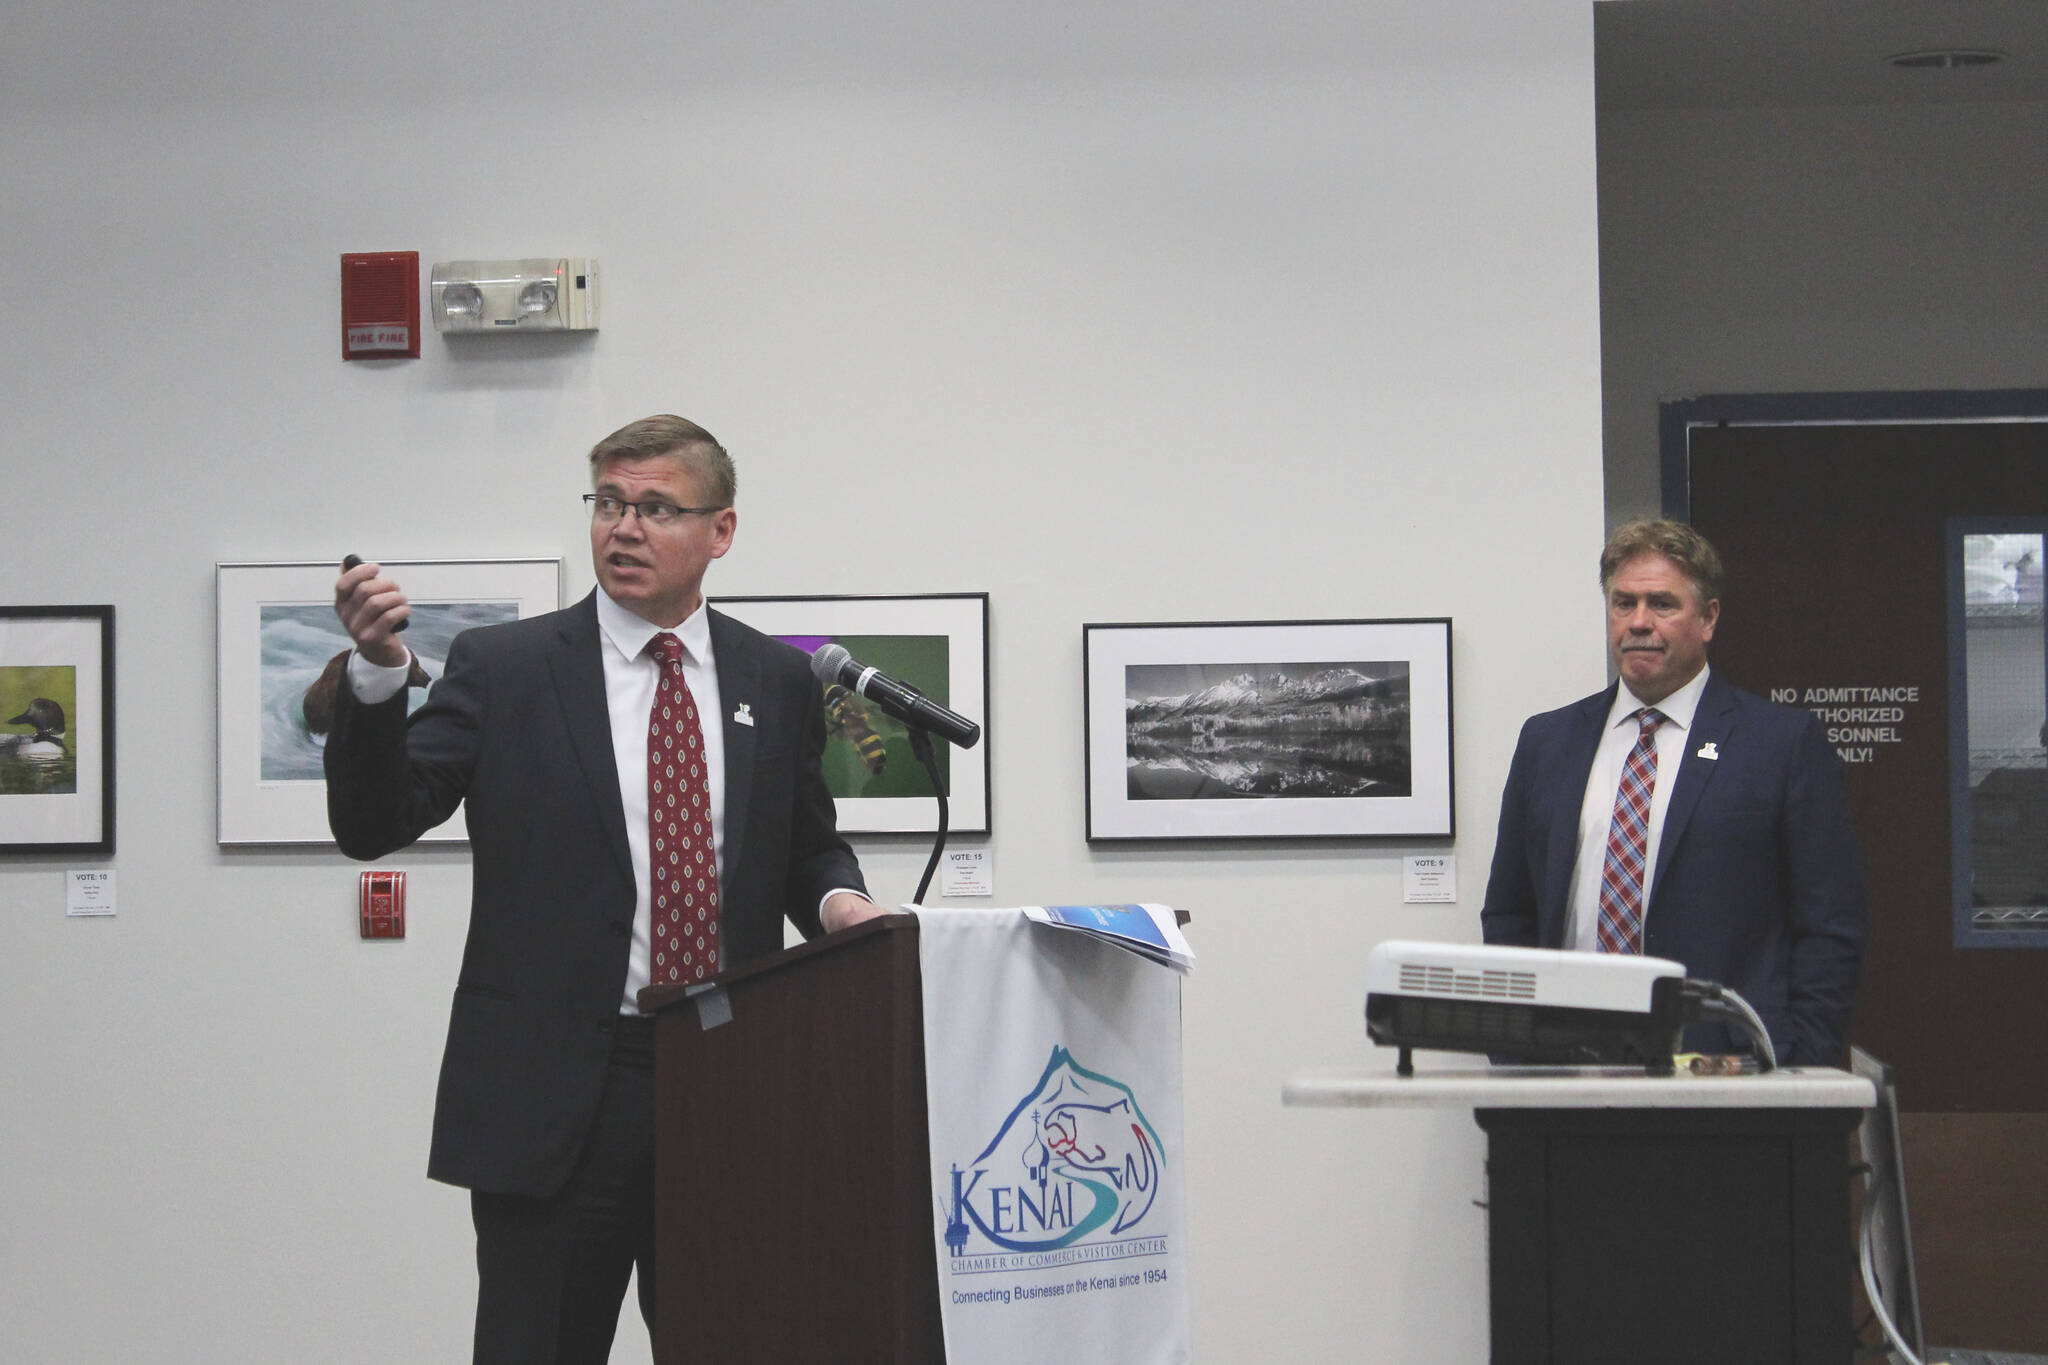 Kenai City Manager Paul Ostrander, left, speaks during a “State of the City” address while Kenai Mayor Brian Gabriel, right, looks on at the Kenai Chamber of Commerce and Visitor Center on Wednesday, May 4, 2022, in Kenai, Alaska. (Ashlyn O’Hara/Peninsula Clarion)